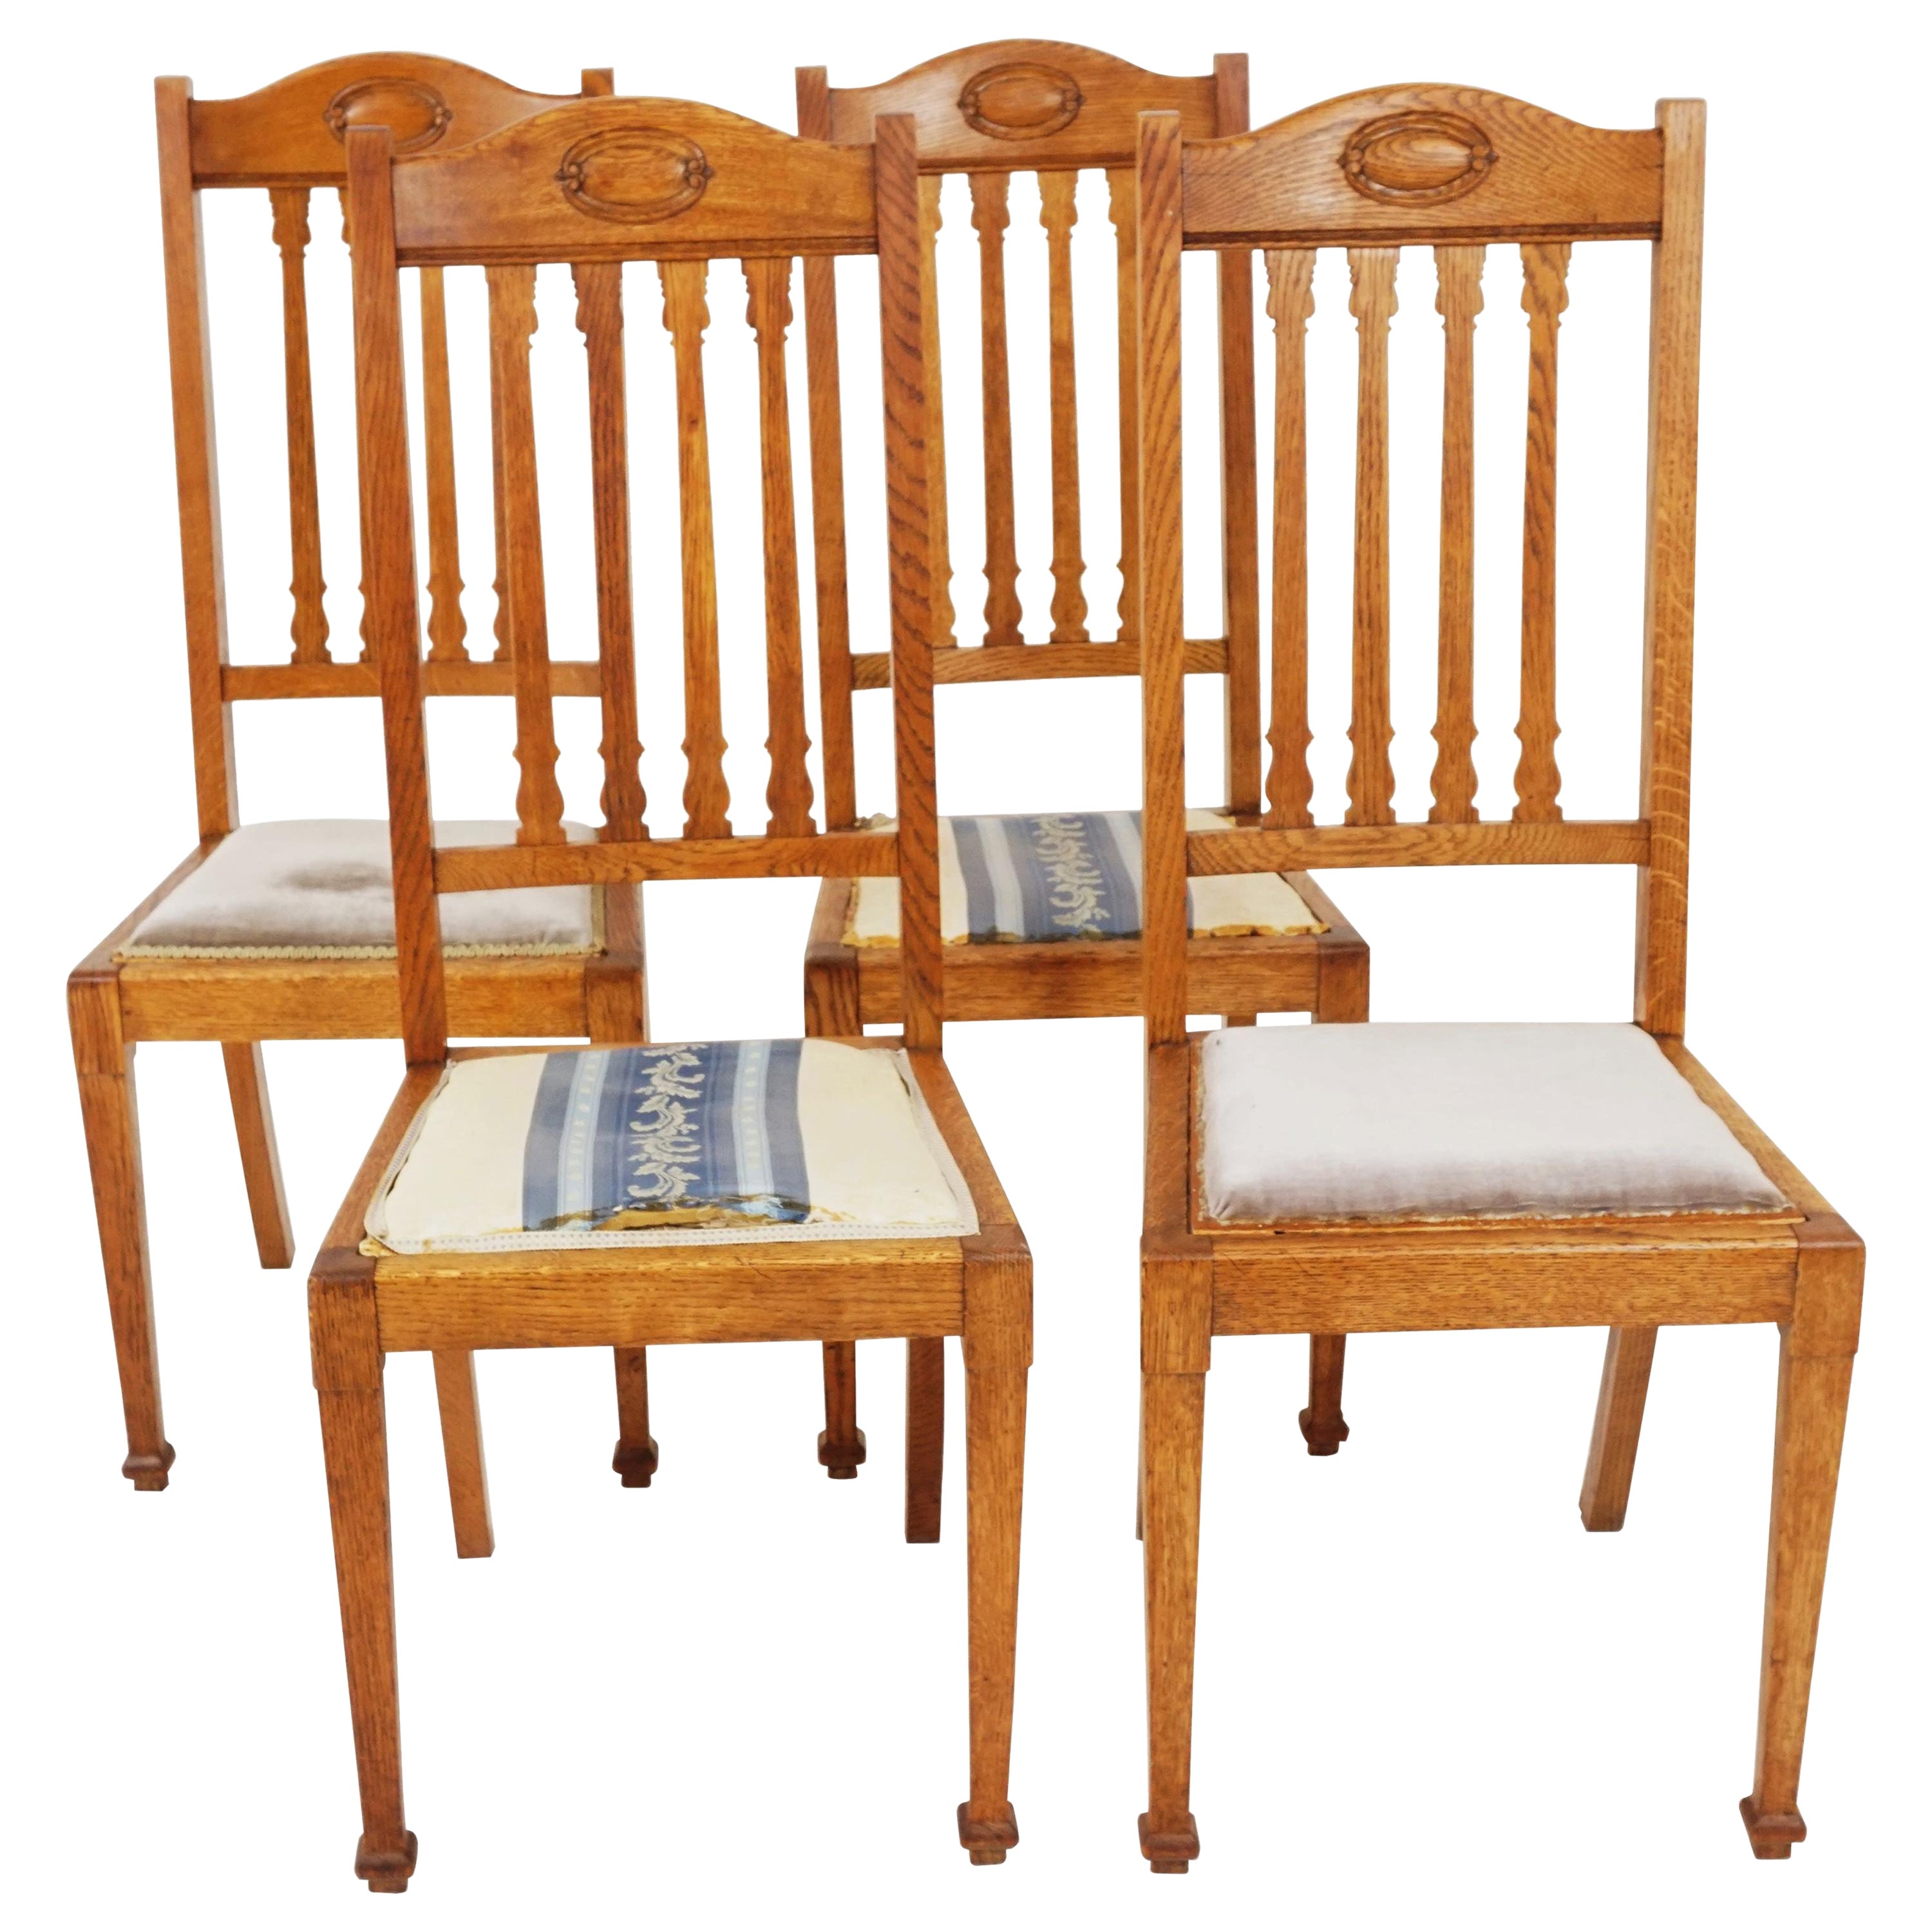 4 Antique Dining Chairs, Oak Arts & Crafts Chairs, Scotland 1910, H166